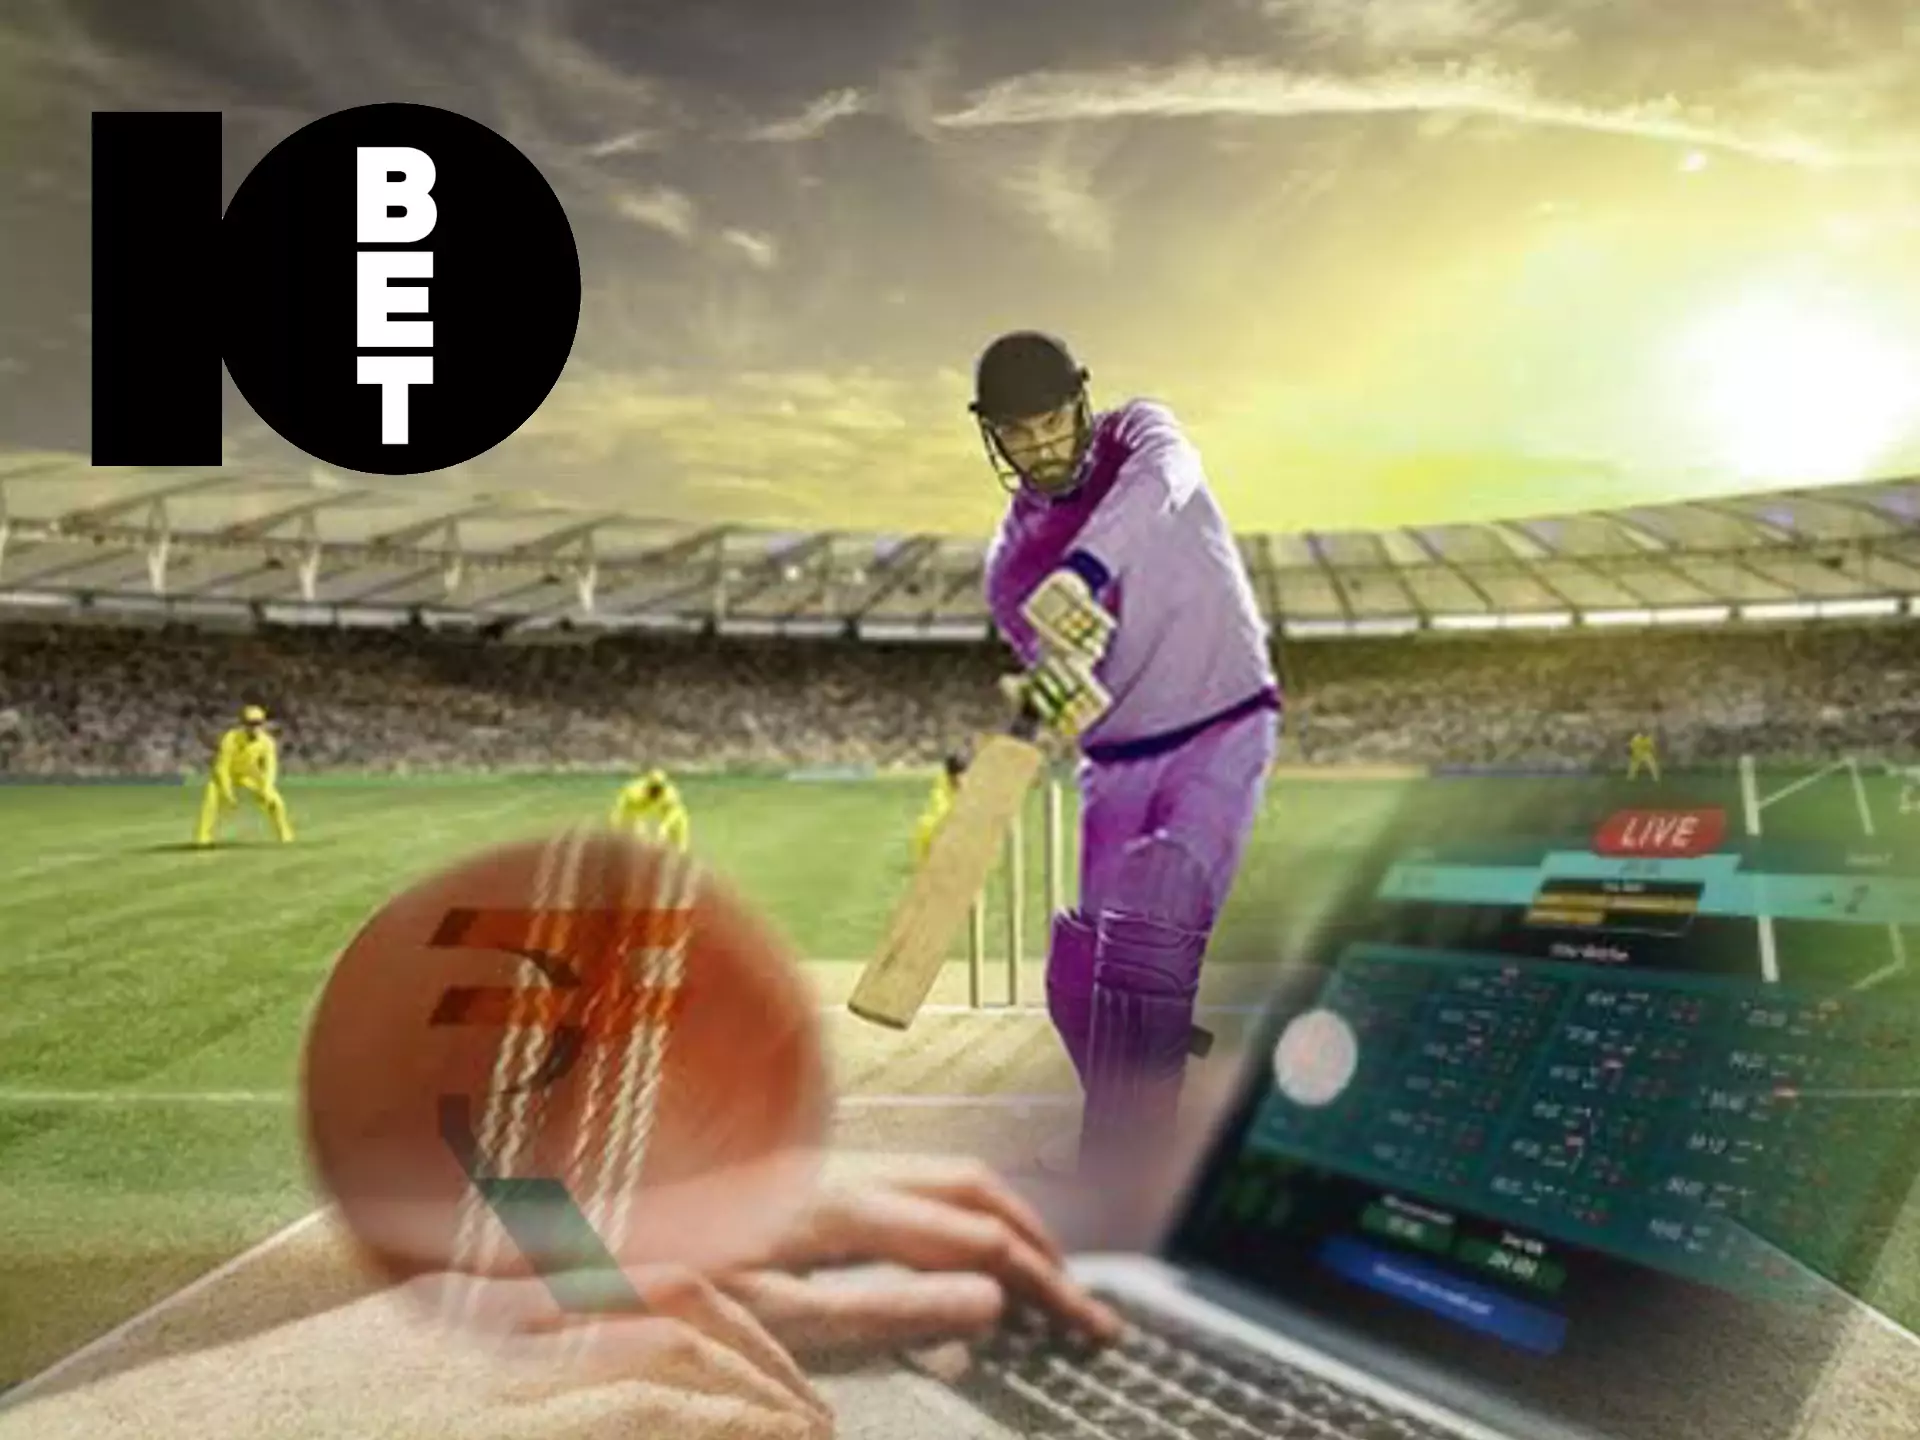 10bet is one of the most convenient sportsbook for betting on cricket.